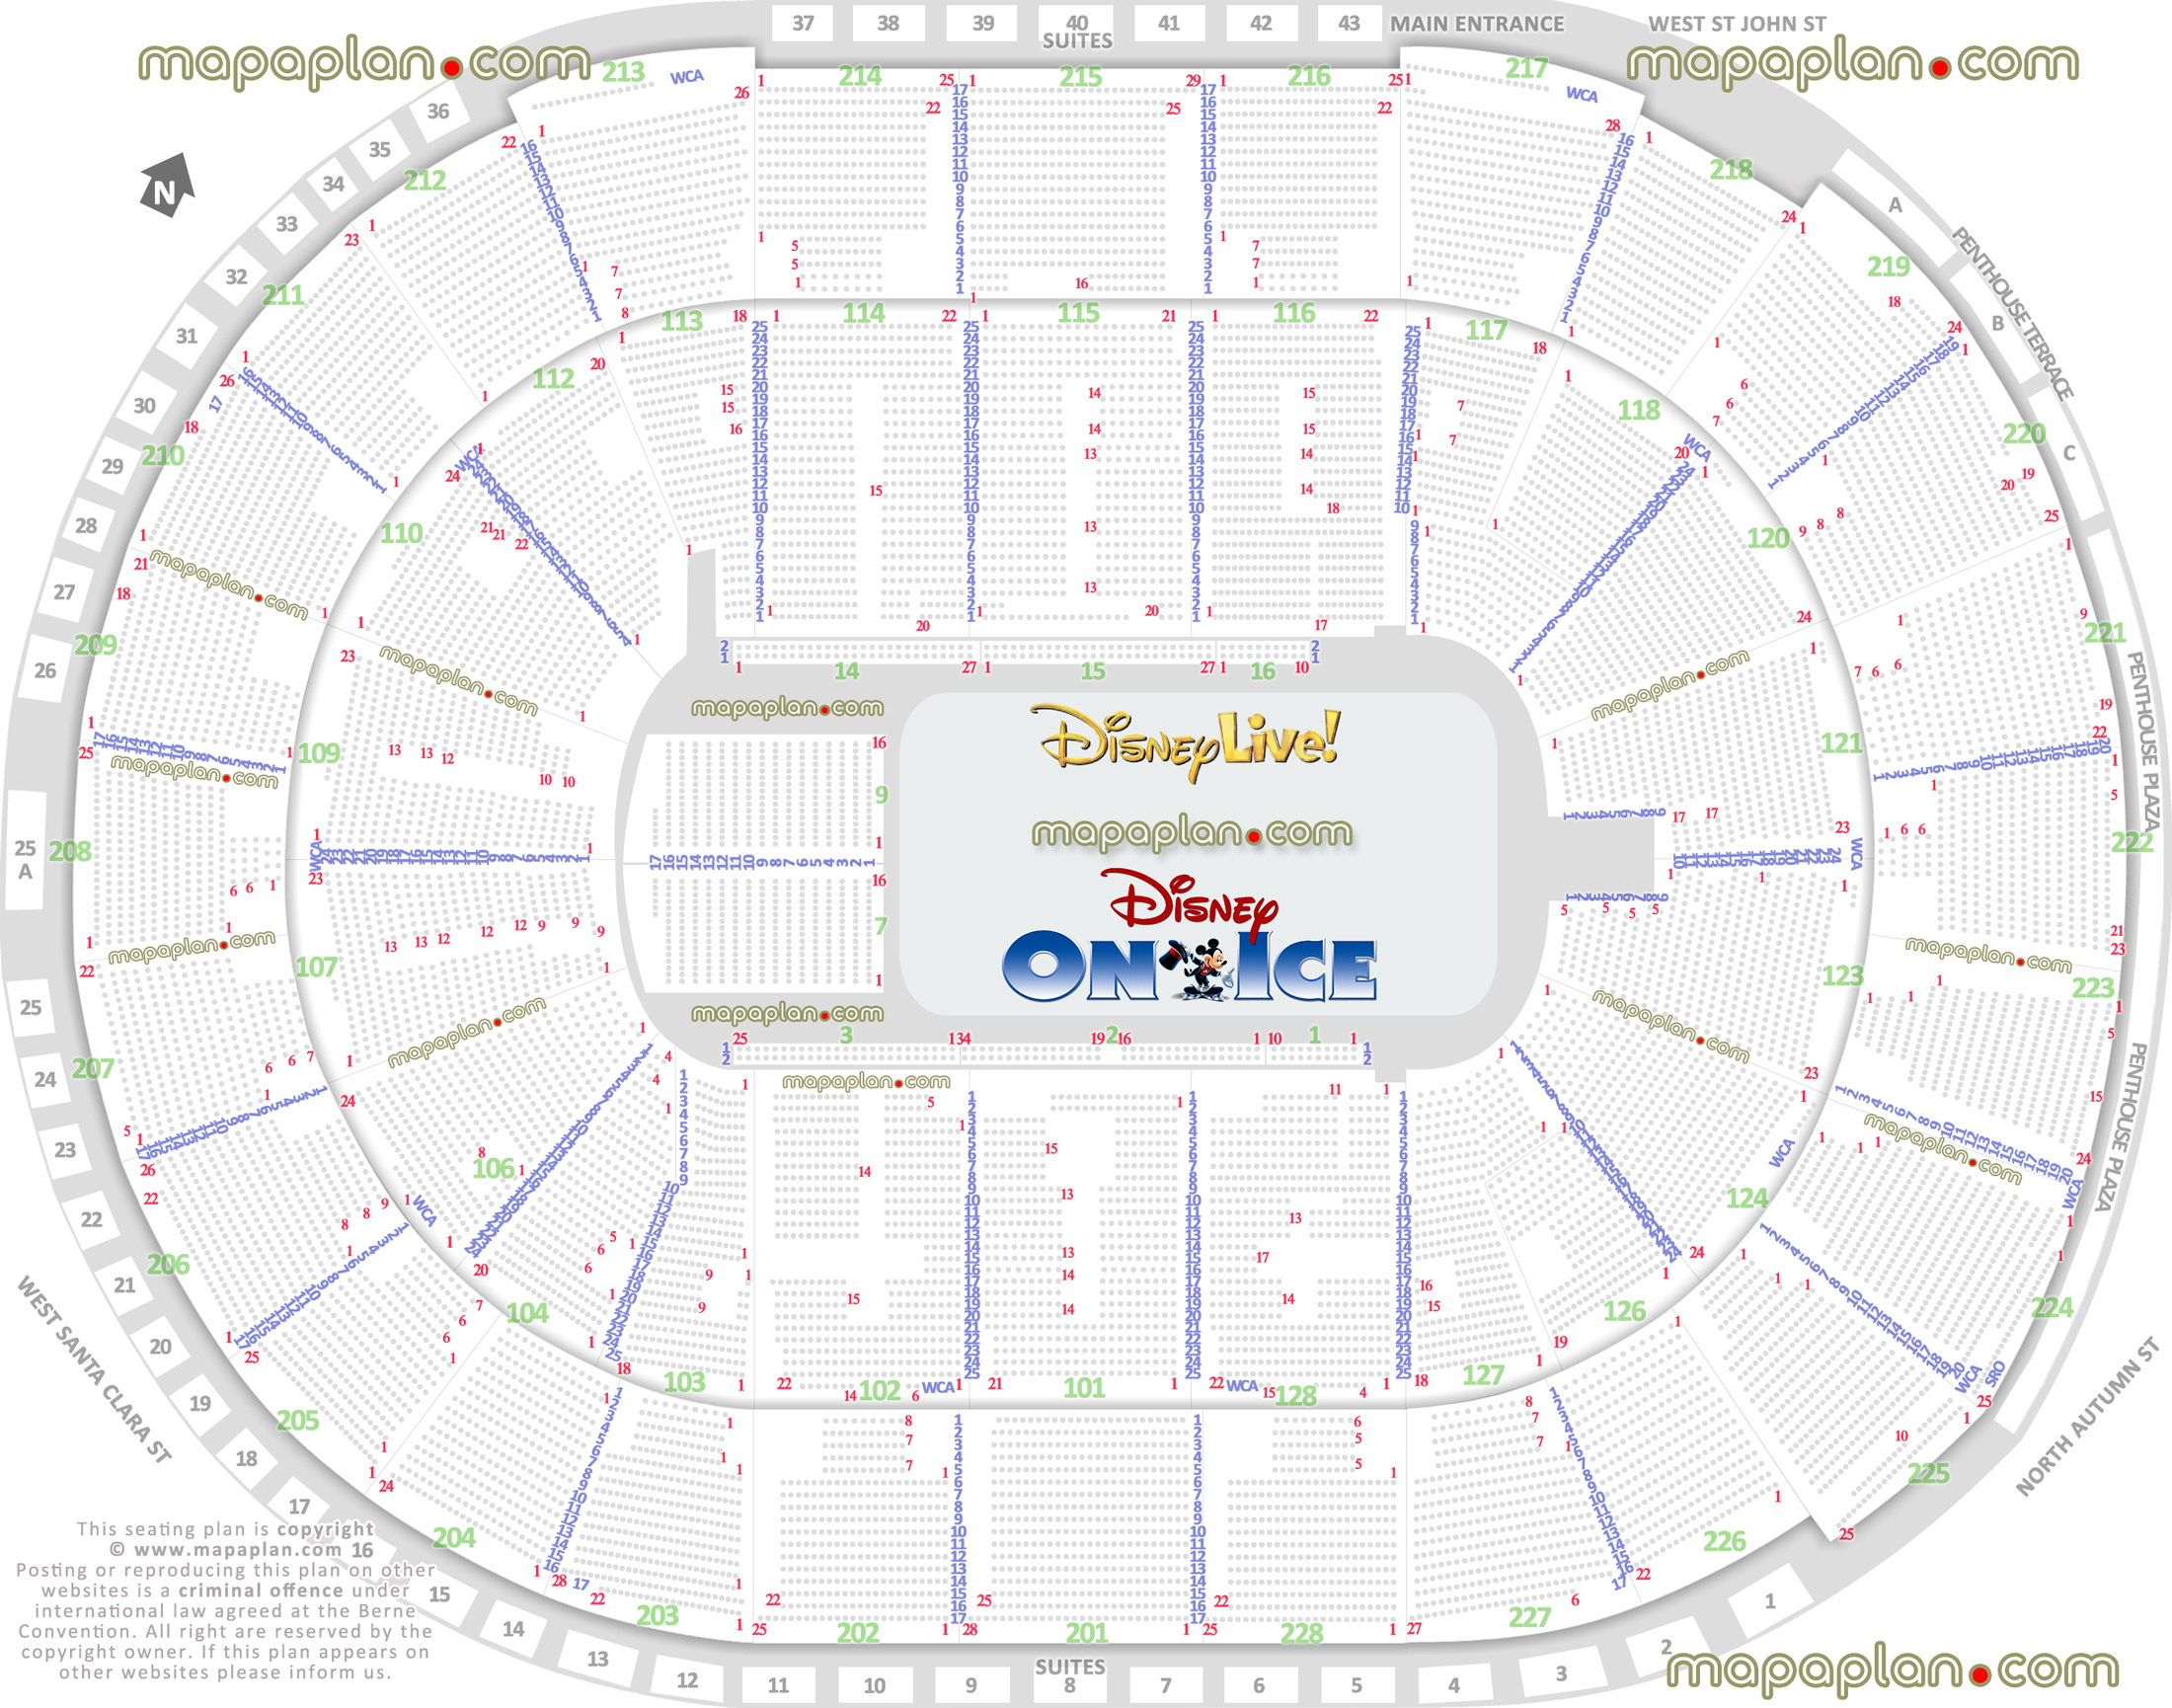 disney live disney ice san jose shark tank hp pavilion usa best seat finder 3d tool precise detailed aisle seat row numbering location data plan ice rink event floor level lower bowl concourse upper balcony seating San Jose SAP Center seating chart